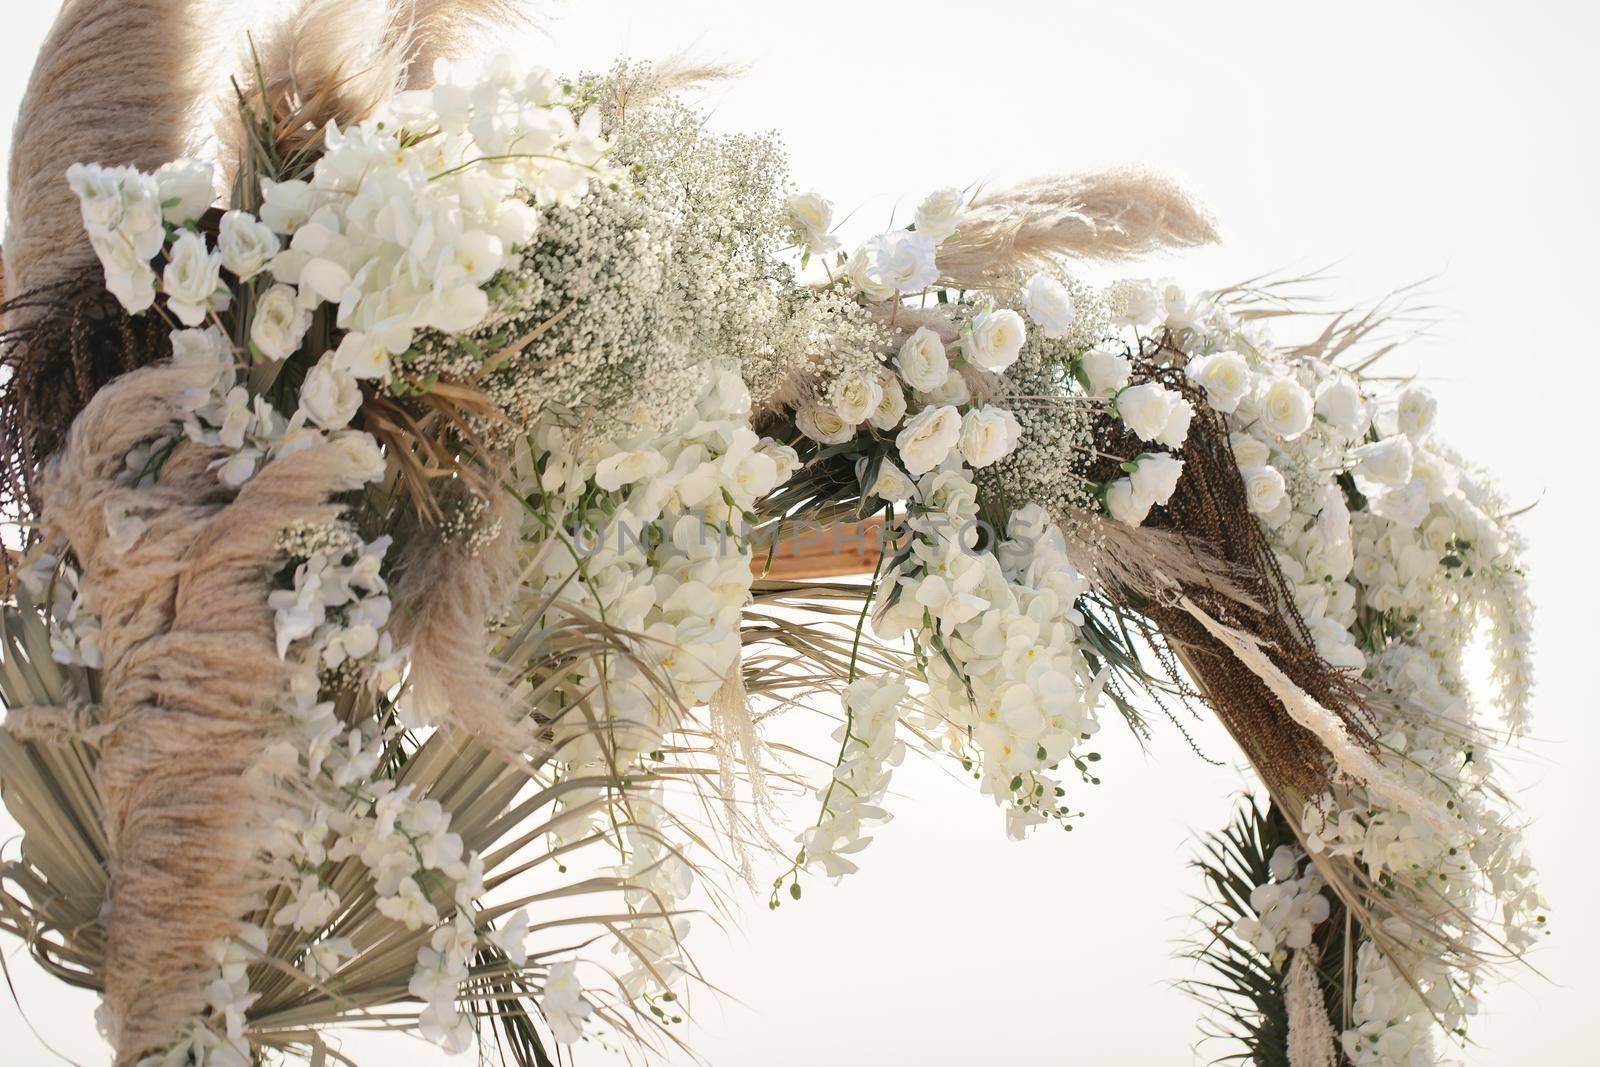 Fresh flowers and dried flowers on the wedding arch.